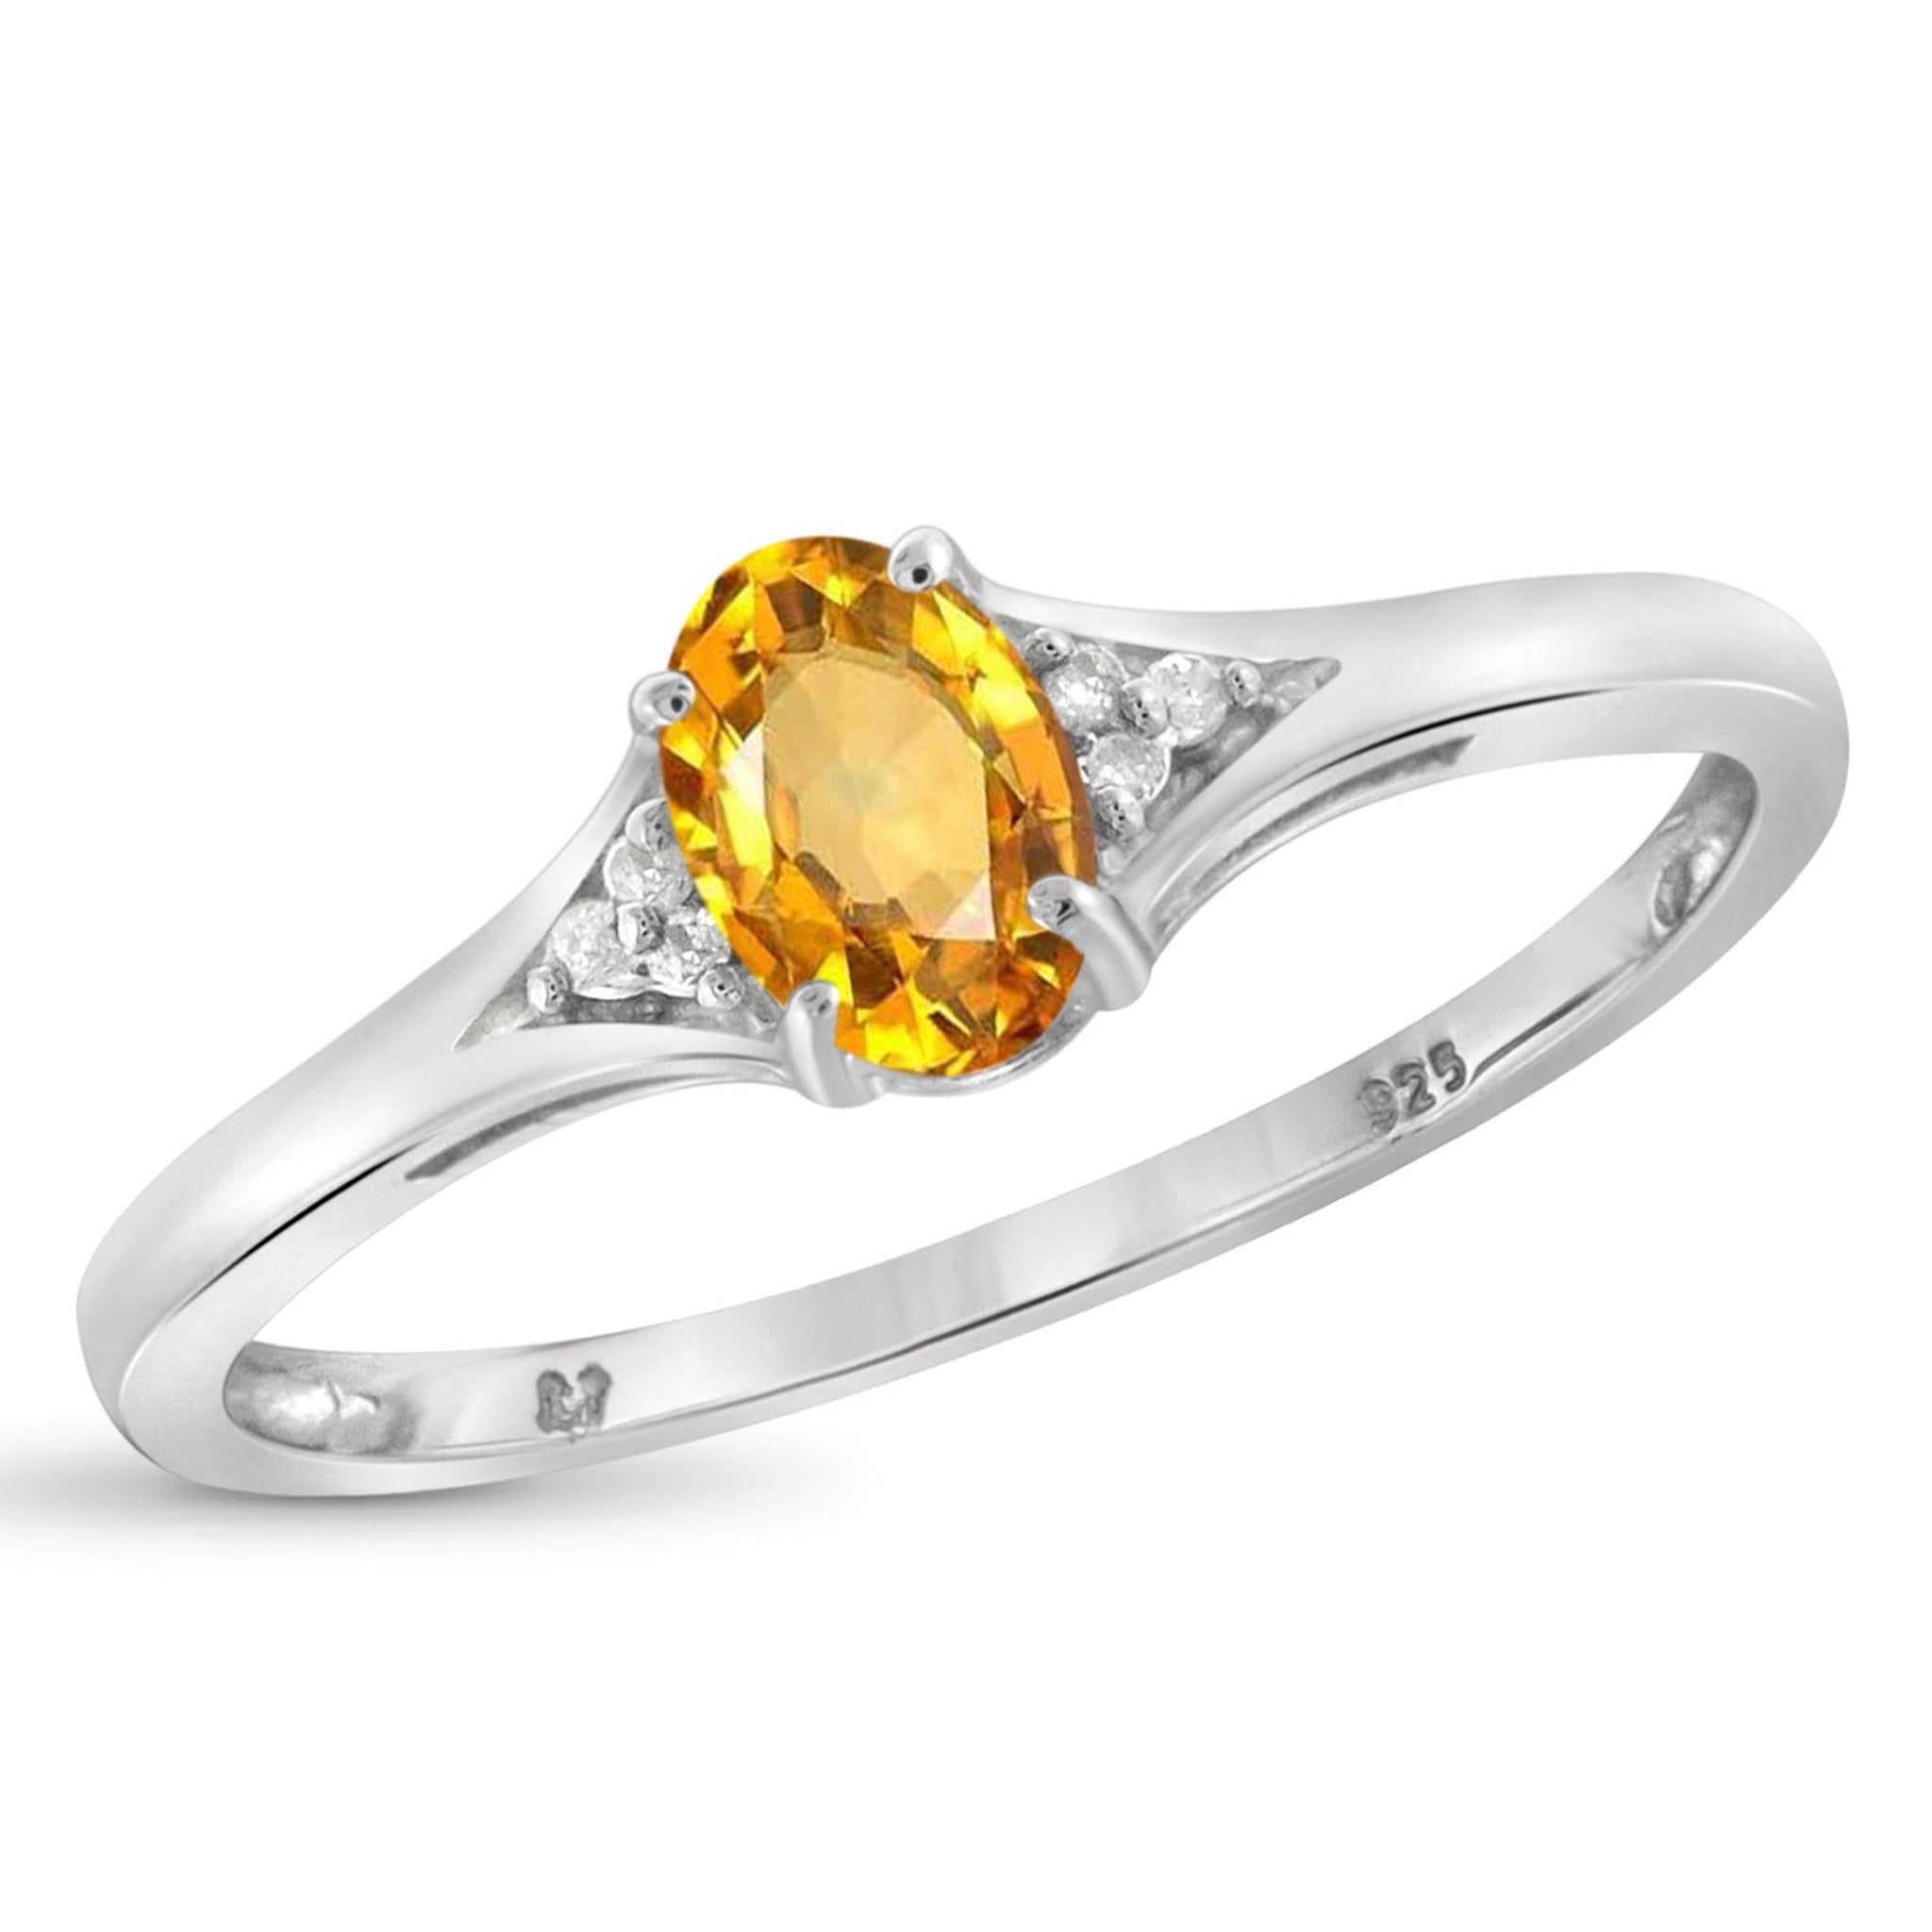 JewelonFire 1/2 Carat T.G.W. Citrine And White Diamond Accent Sterling Silver Ring - Assorted Colors